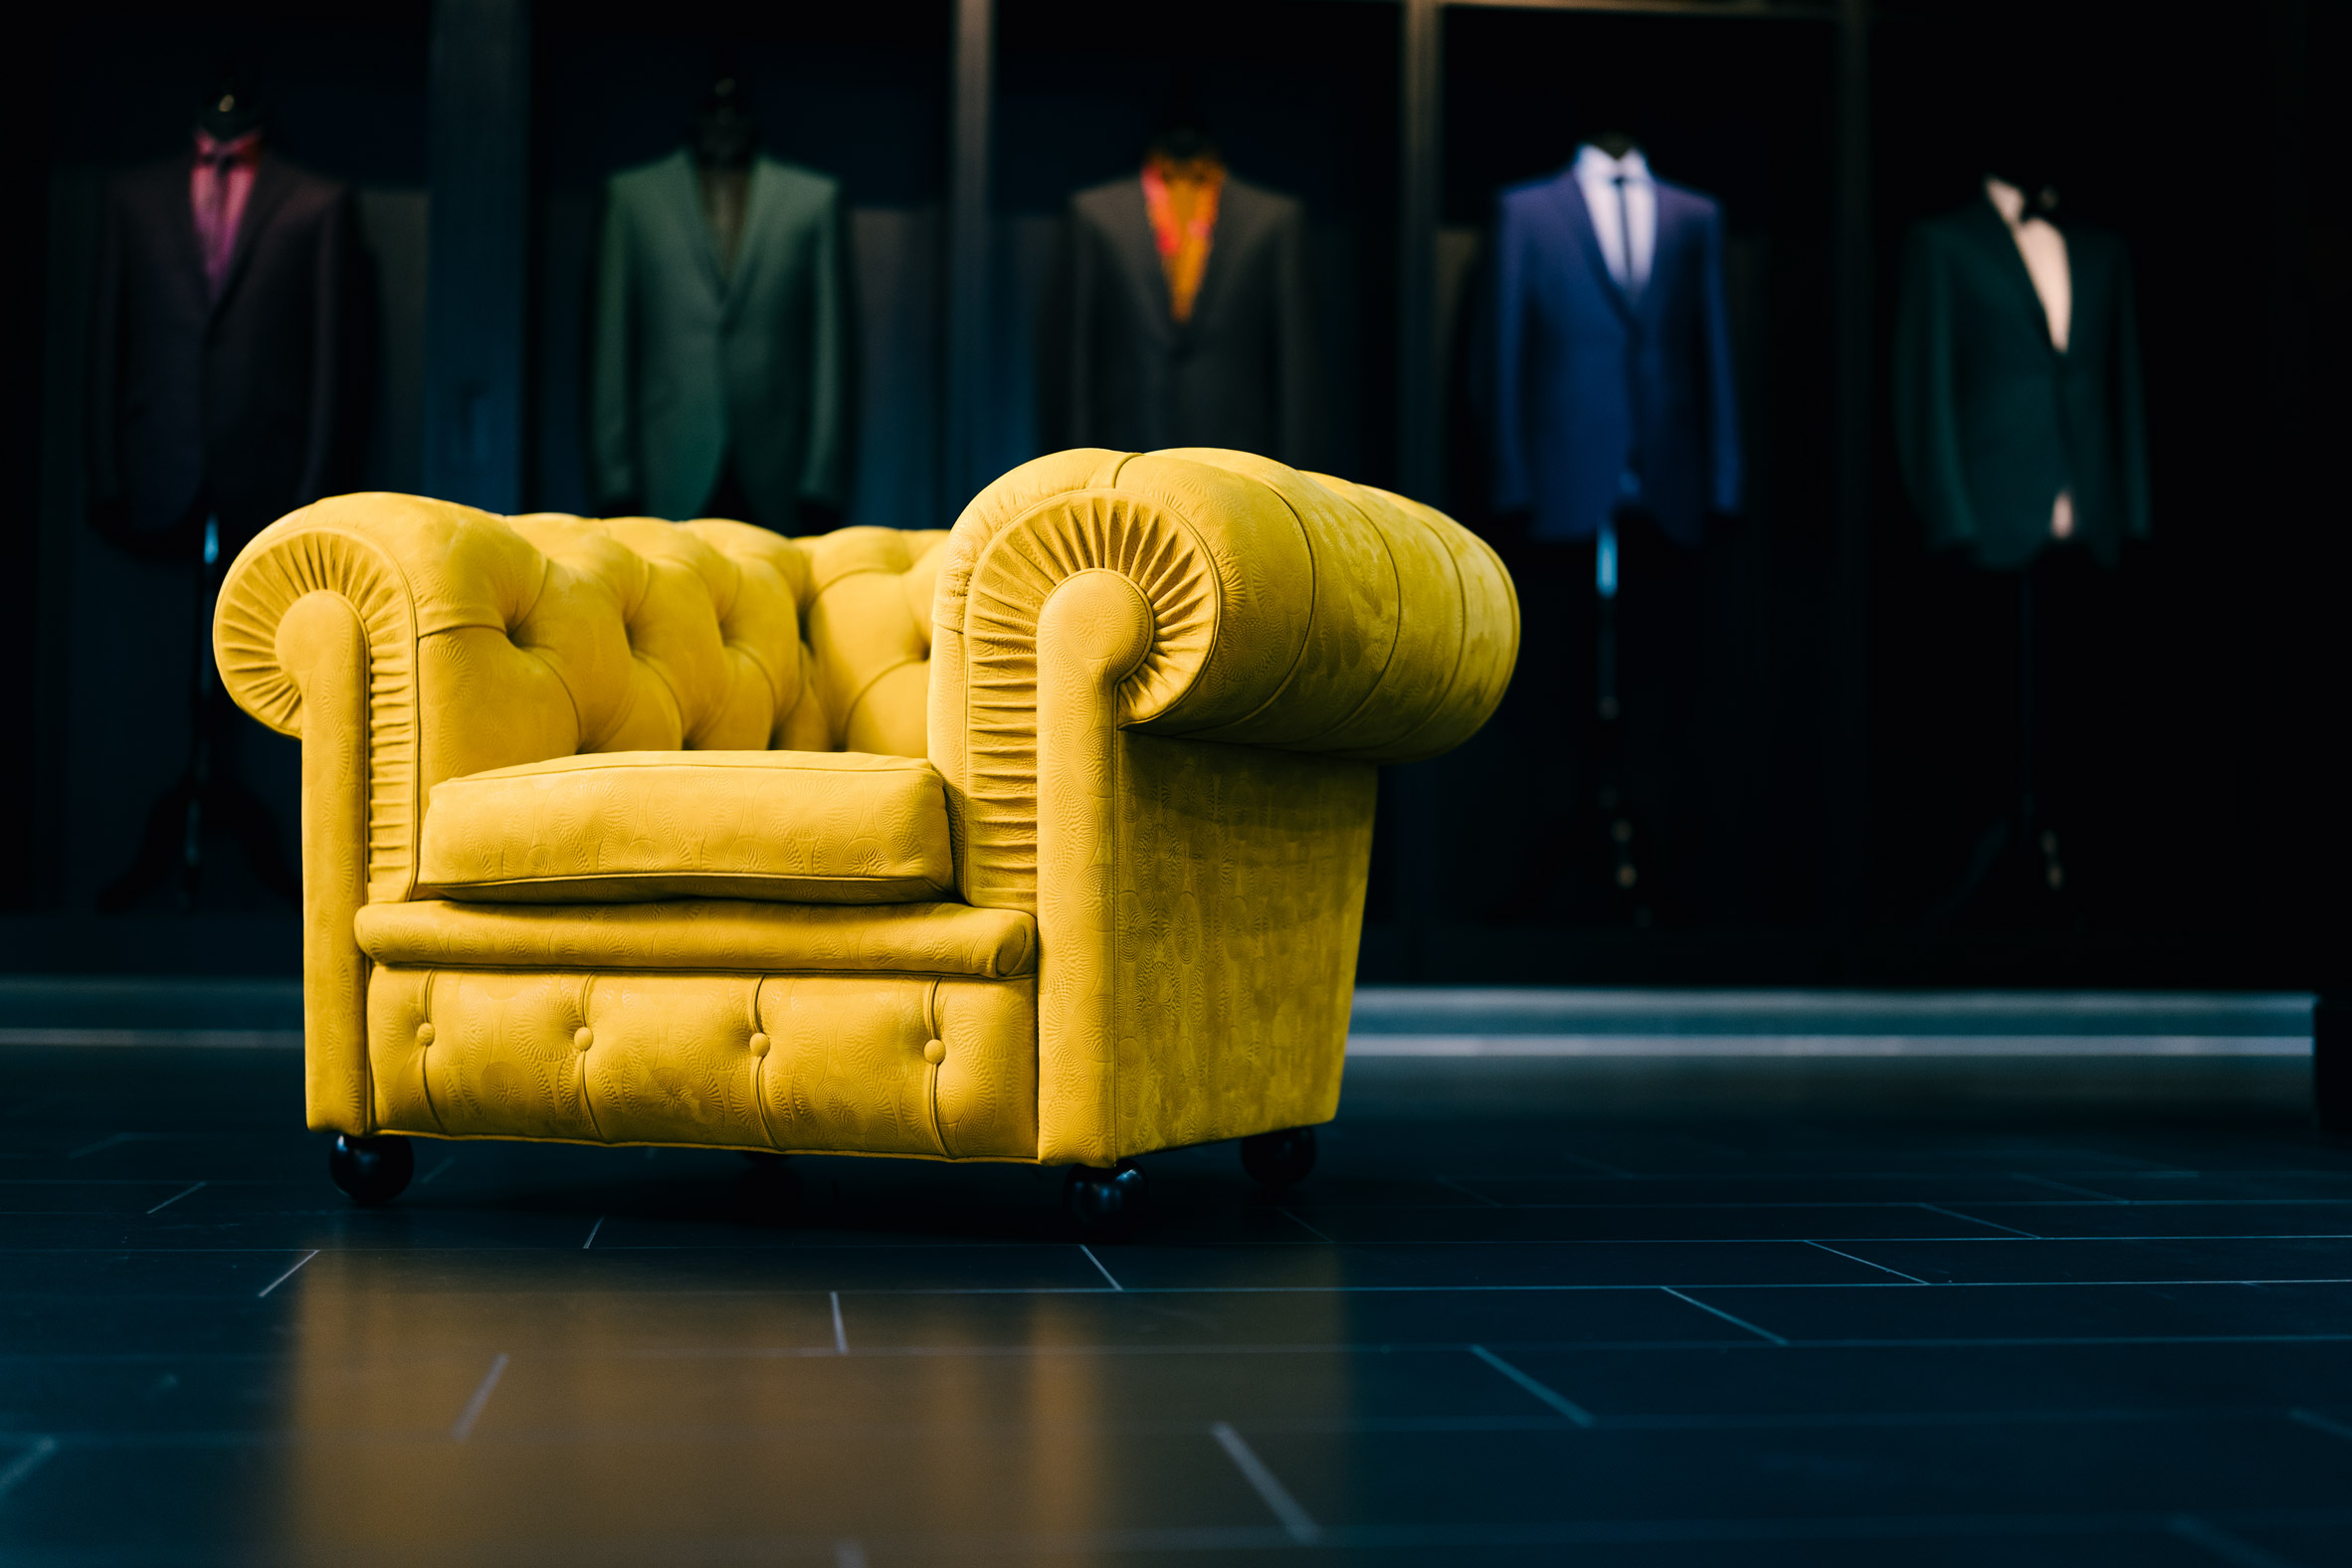 Yellow Chester armchair with embossed leather finish by Ozwald Boateng and Poltrona Frau